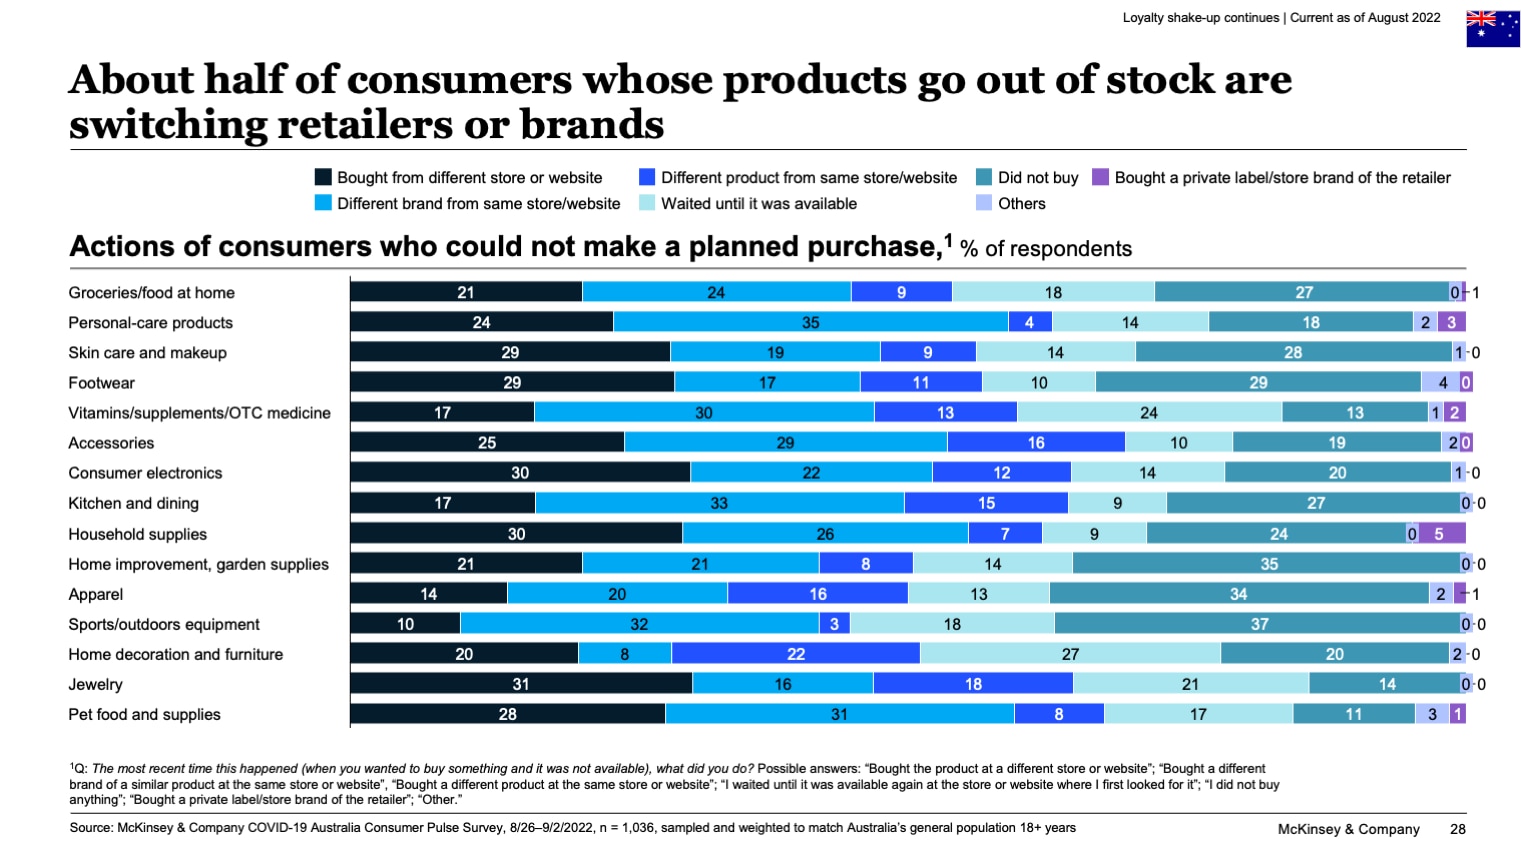 About half of consumers whose products go out of stock are switching retailers or brands